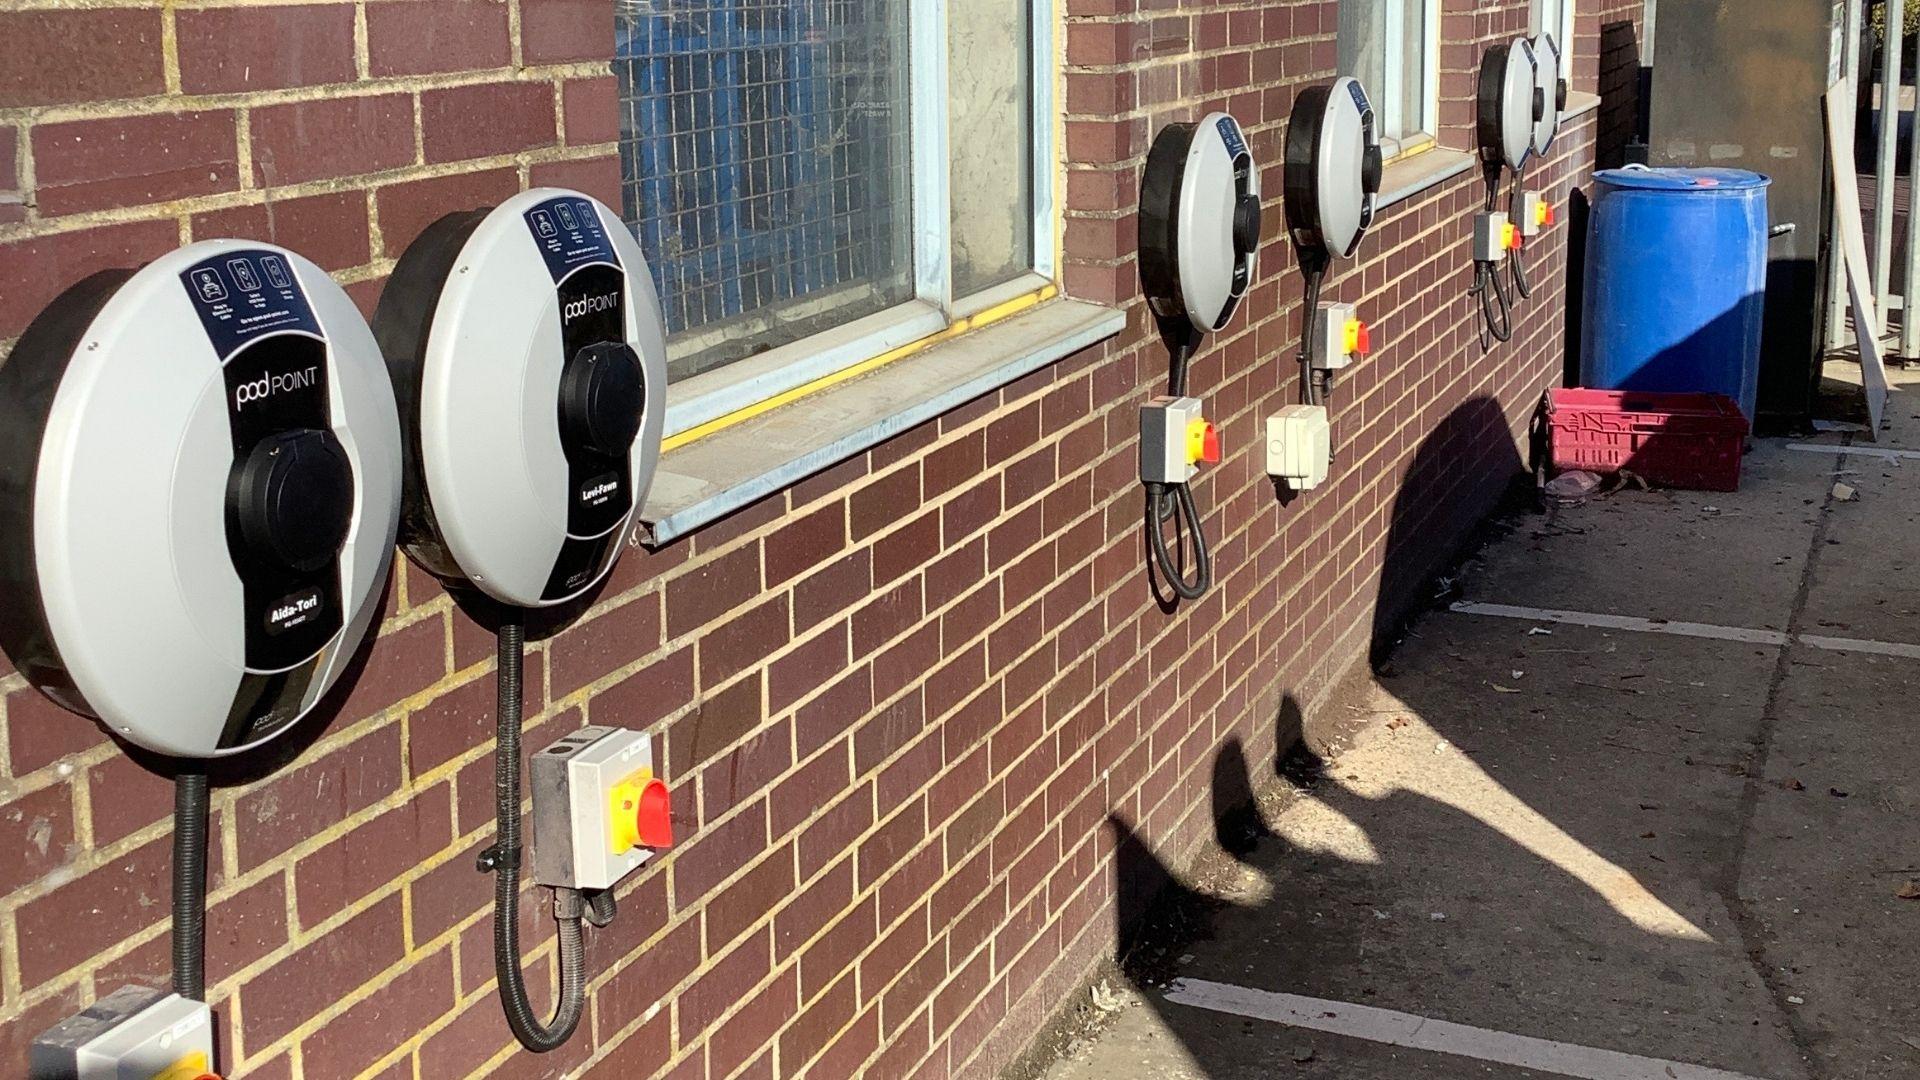 A line of Pod Point Solo 3's installed on the side of a brick building in an outdoor car park